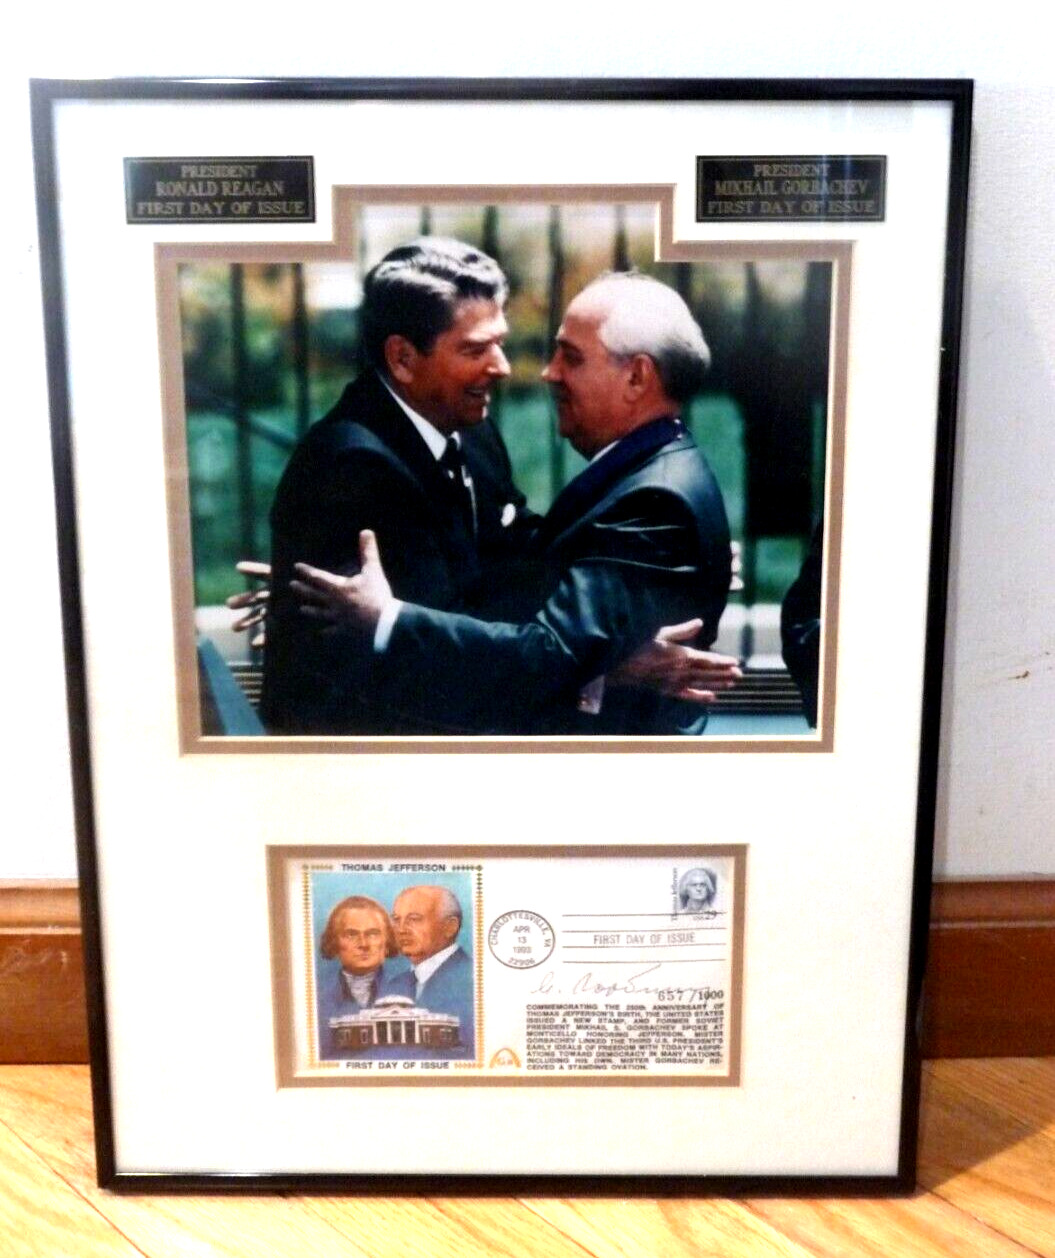 MIKHAIL GORBACHEV GATEWAY STAMP SIGNED, FRAMED 1st DAY ISSUE. Photo with Reagan.